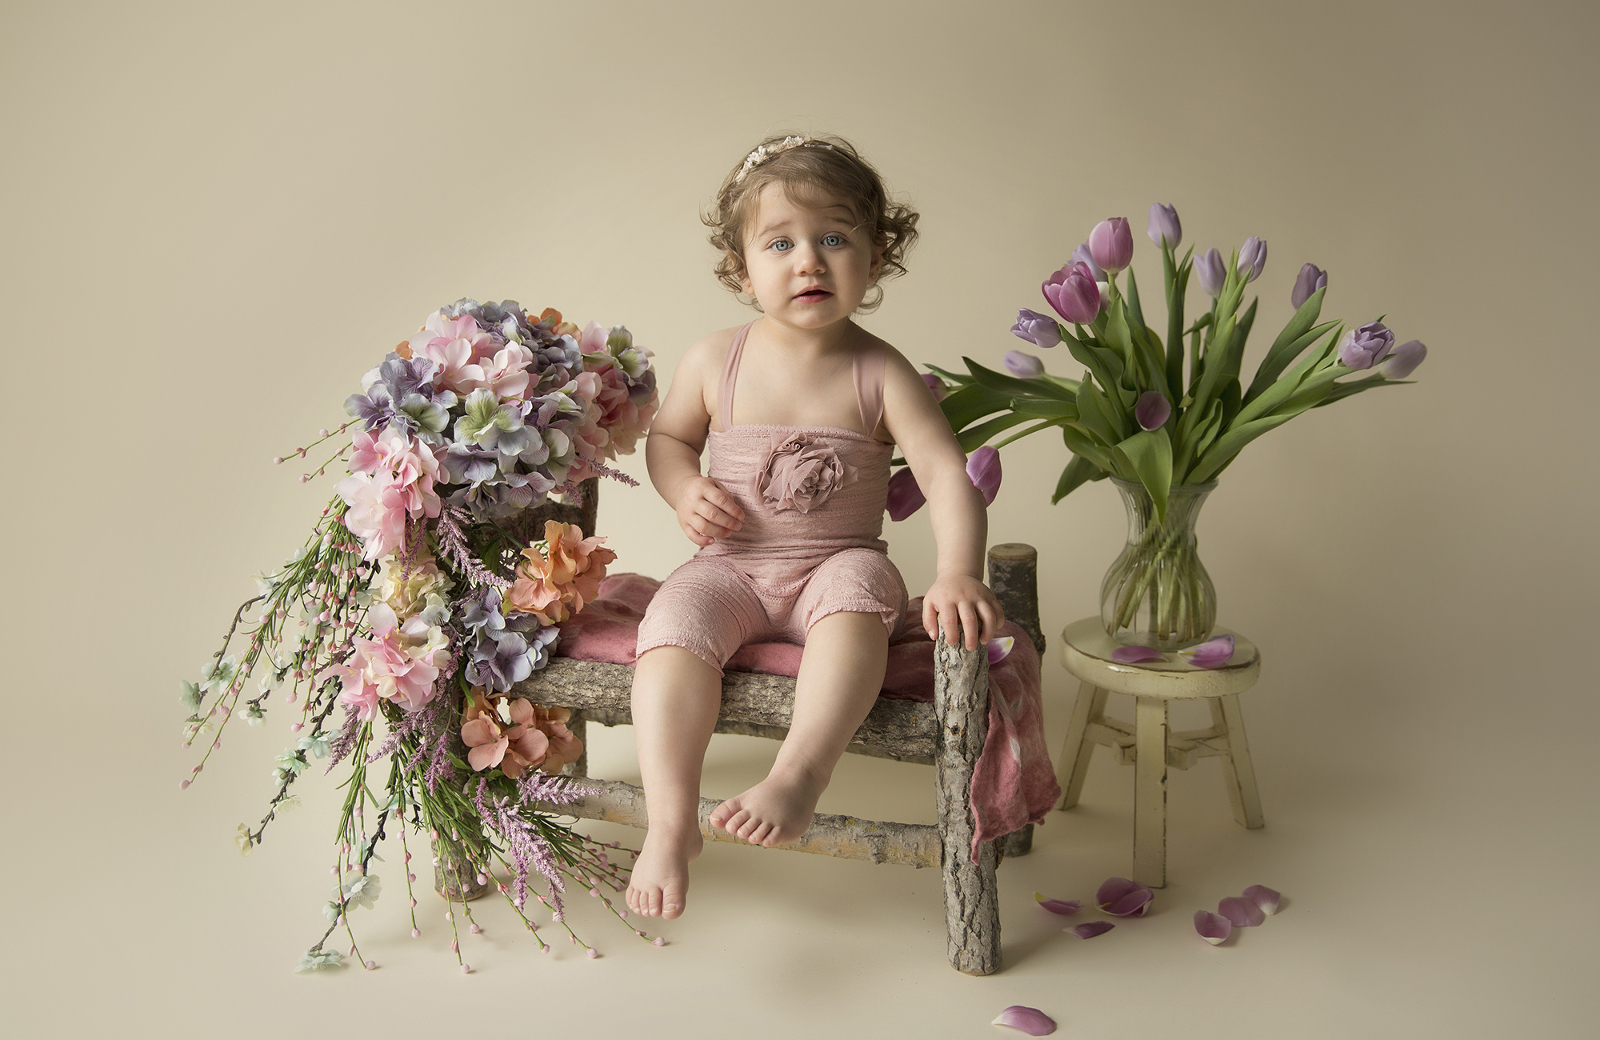 Studio child portrait photography session, a young blonde girl in pink jumper sitting on a custom-made wooden log bed, with flowers nearby, and a light background. Image by Helga Himer Photography, Sudbury, Ontario.